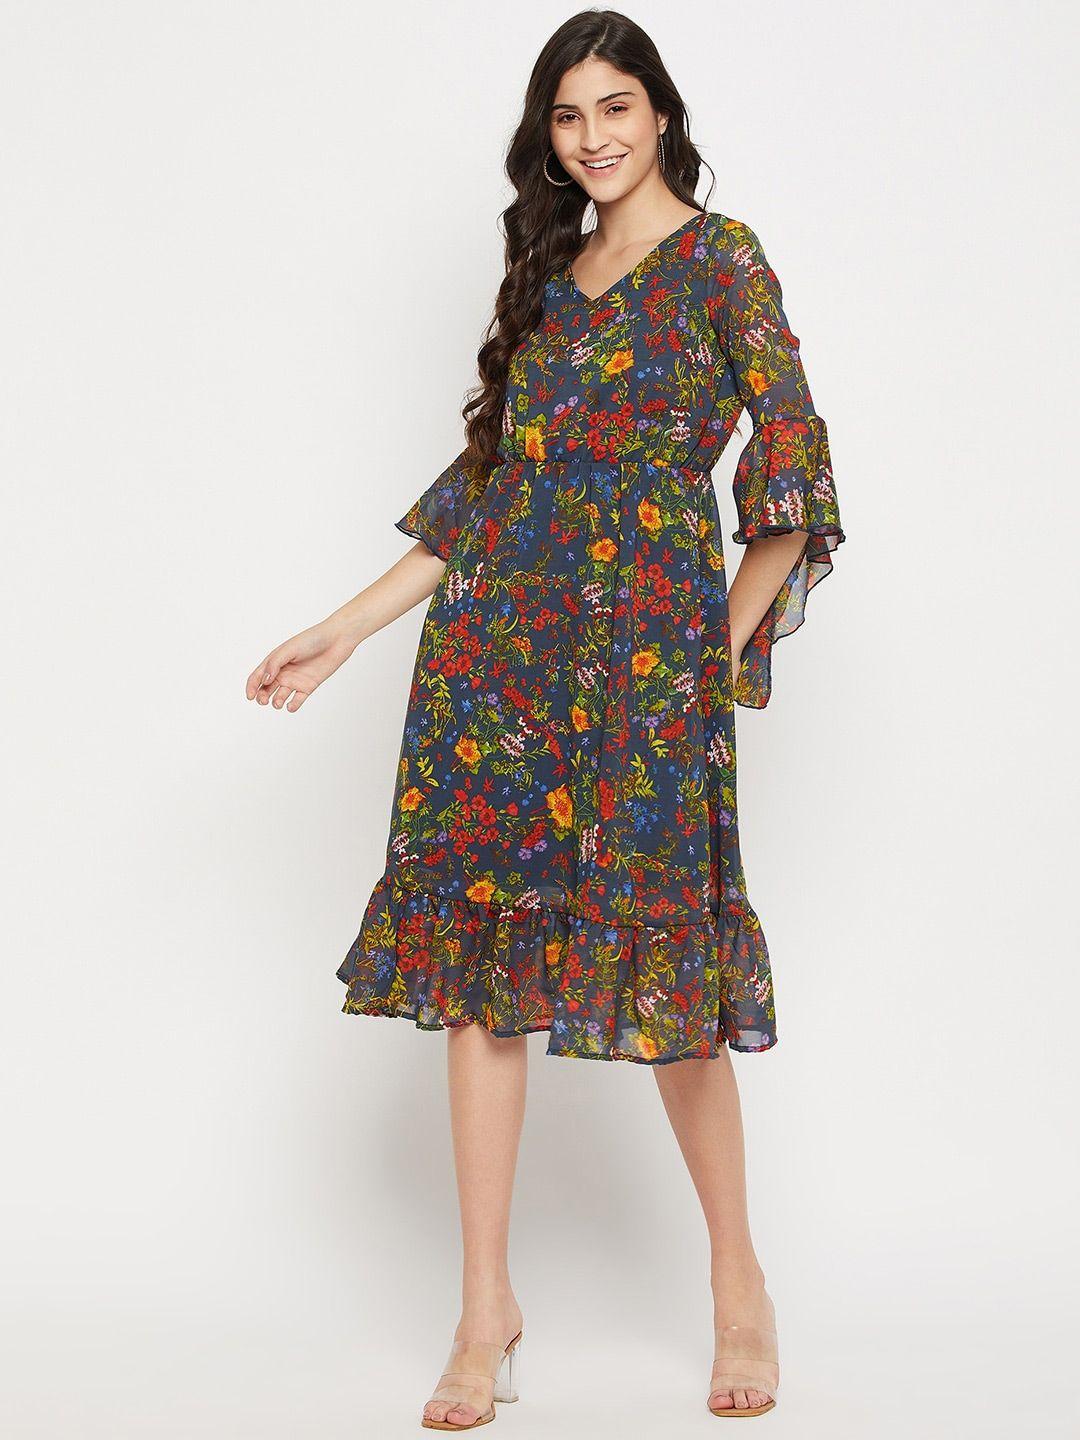 style blush floral printed v-neck bell sleeves ruffles a-line dress